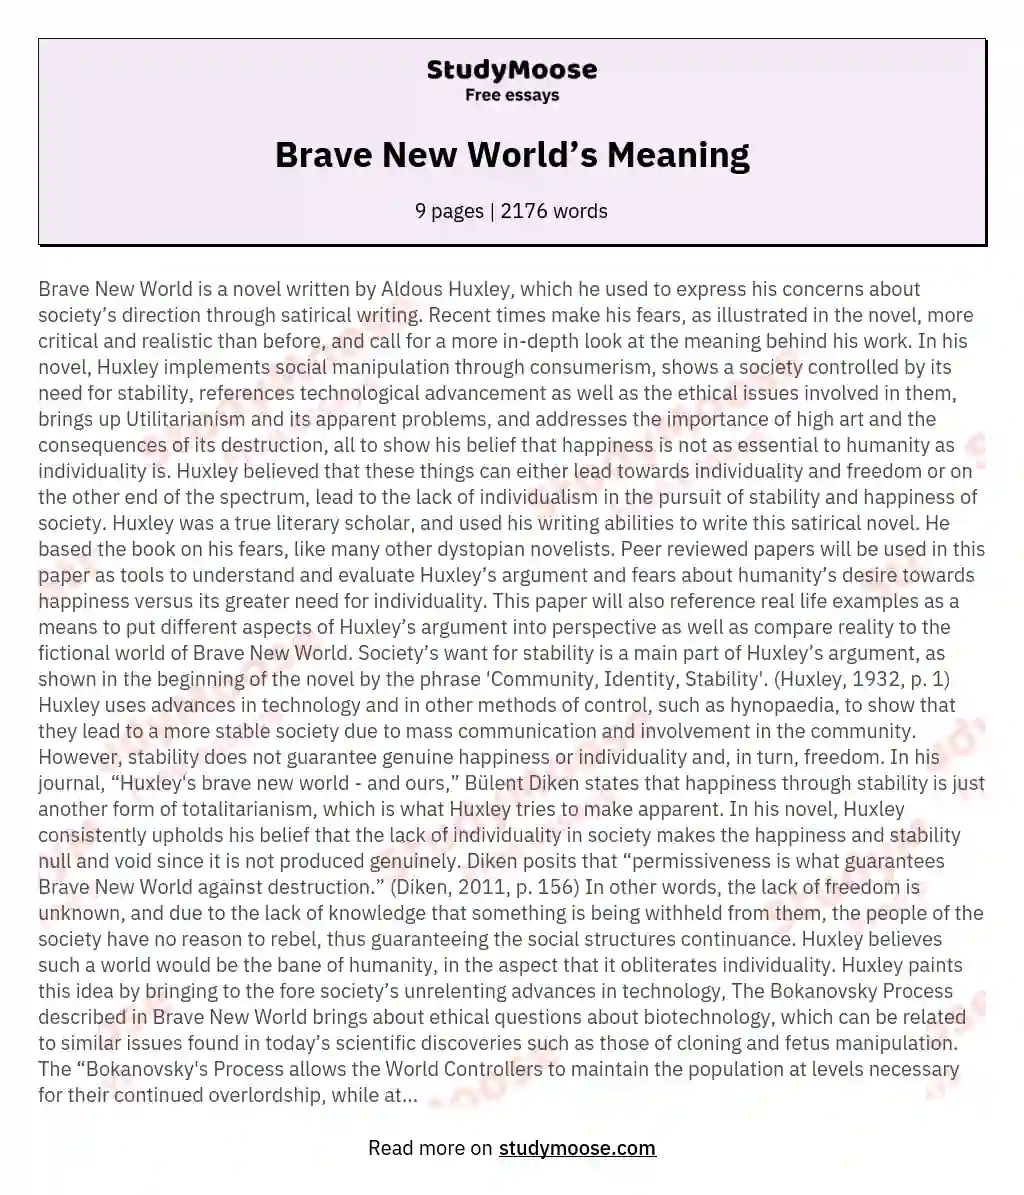 Brave New World’s Meaning